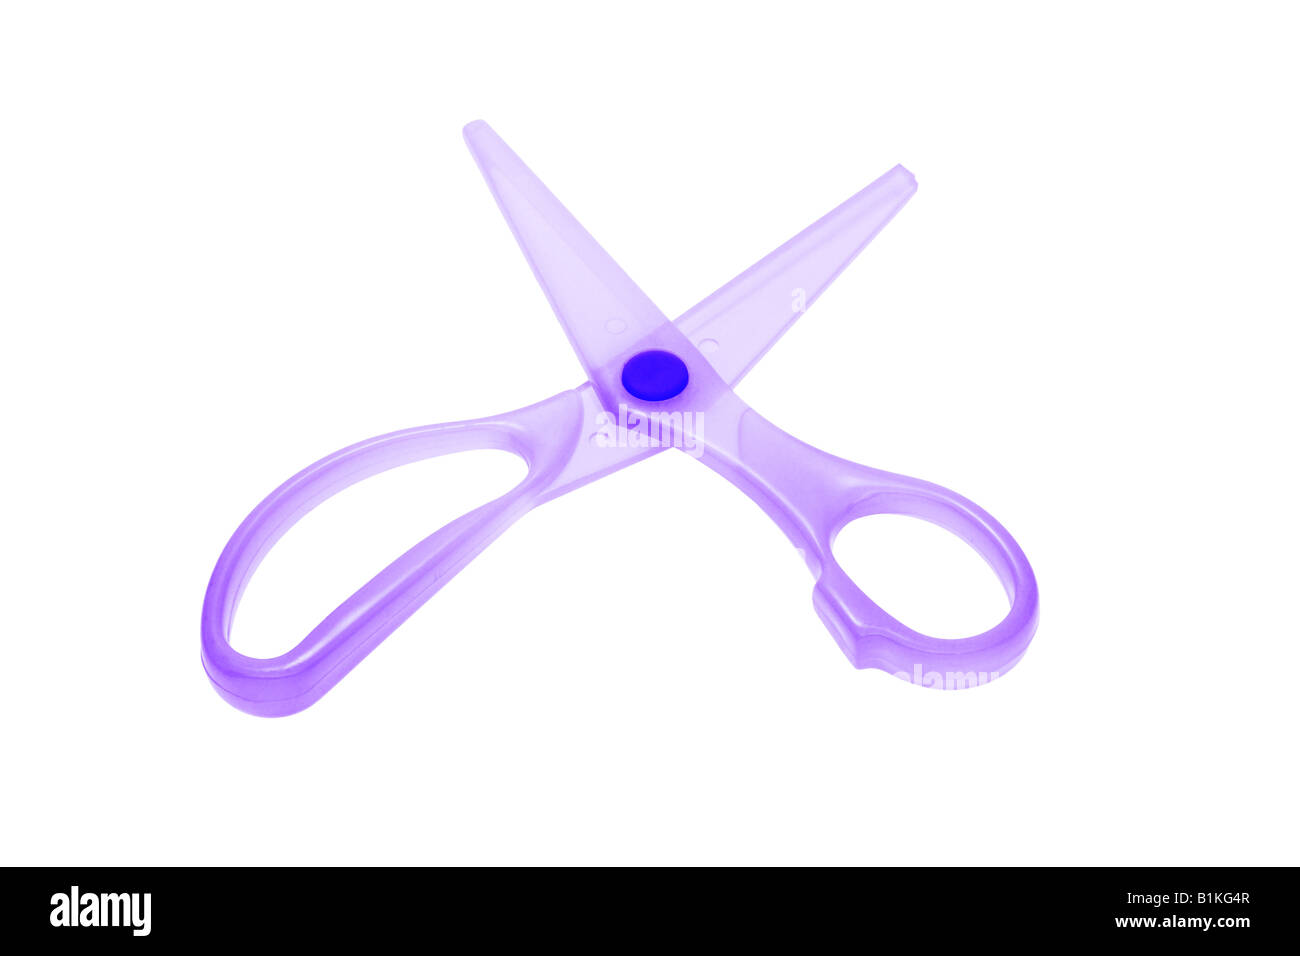 Pair Of Scissors With Colorful Violet Handles Stock Illustration